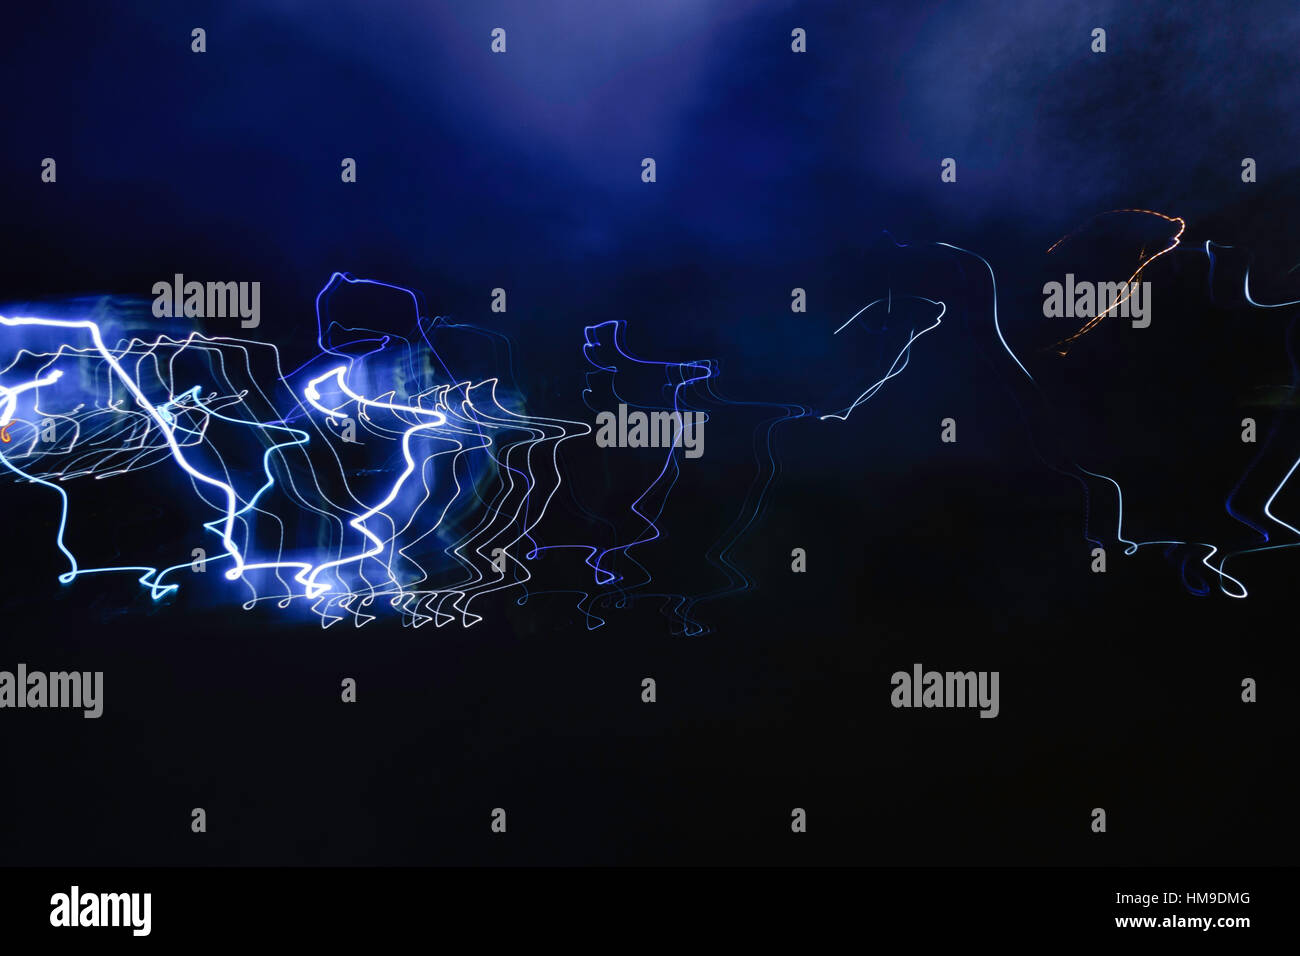 Squiggly lines of bright electrical impulses, concept electrical activity brain, body, gone awry. Concept image. Stock Photo